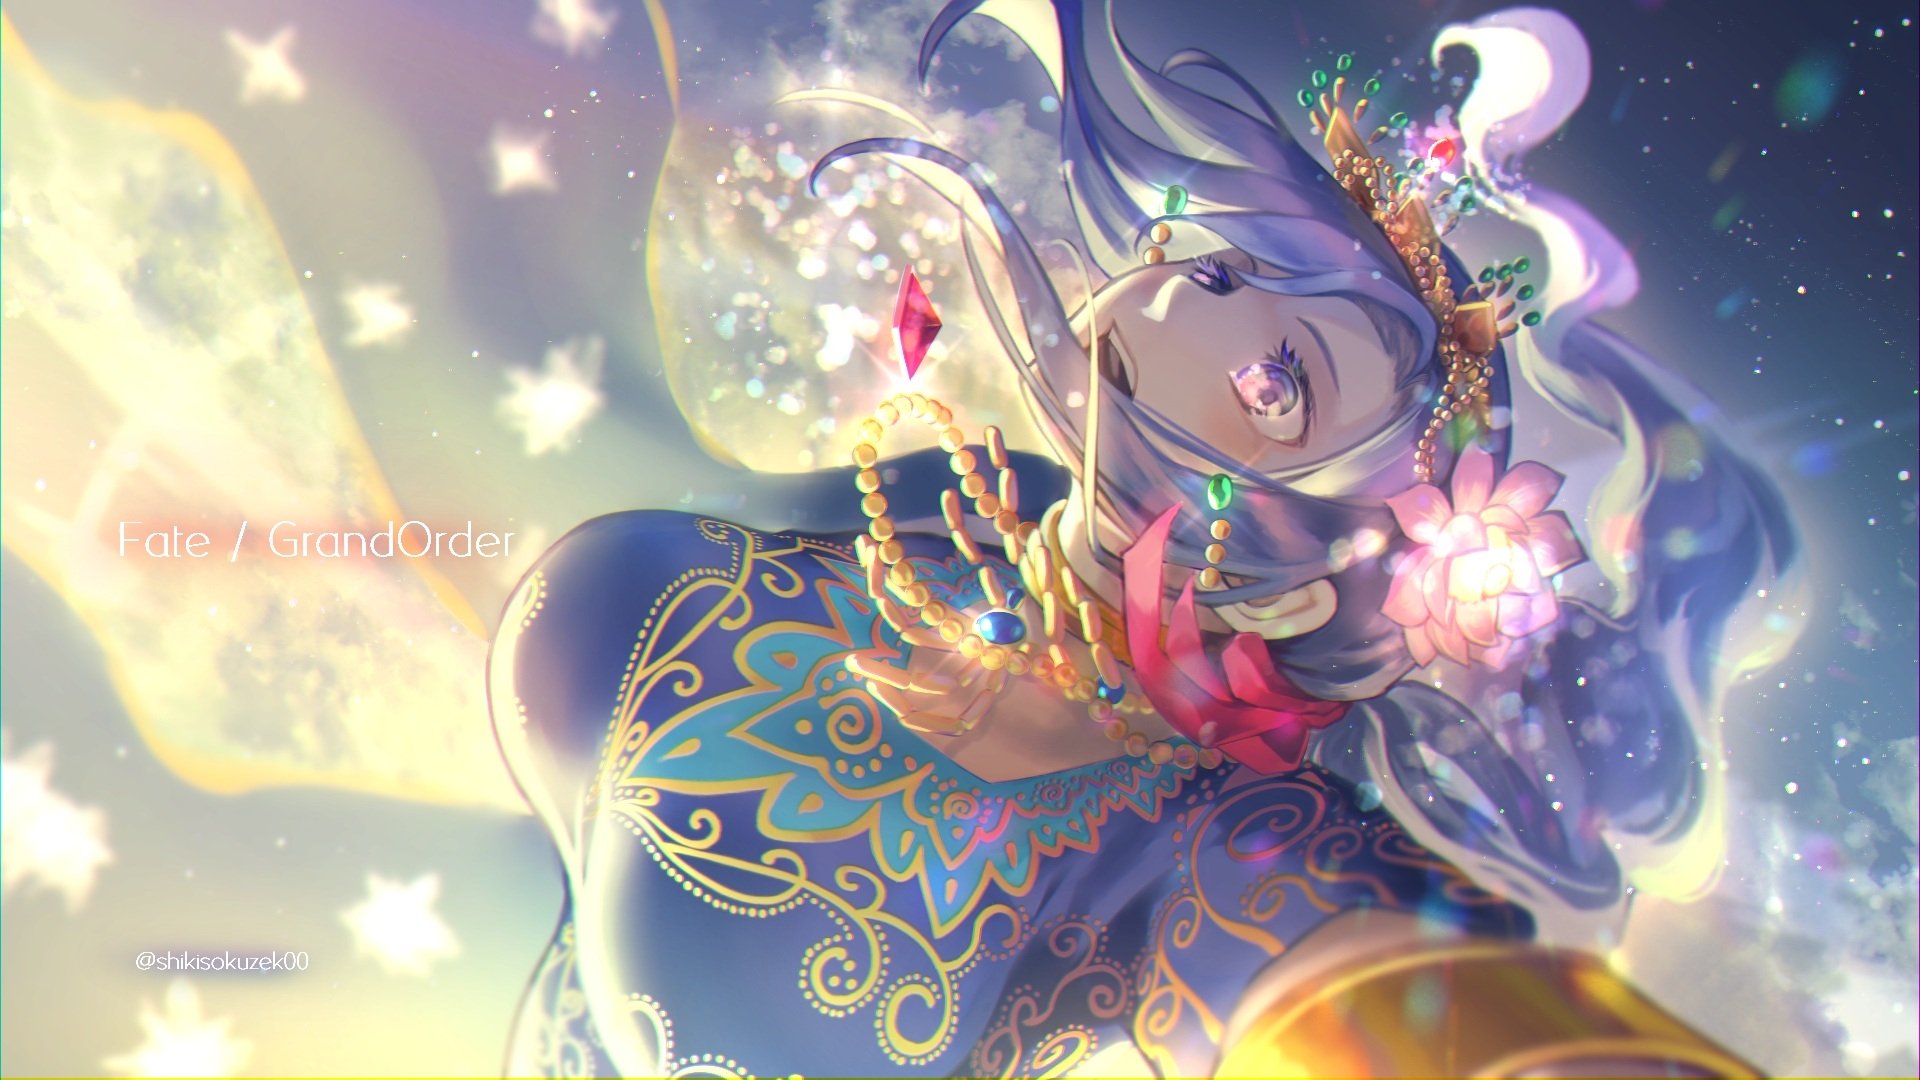 Fate Grand Order Hd Wallpaper Background Image 1920x1080 Id 1002326 Wallpaper Abyss